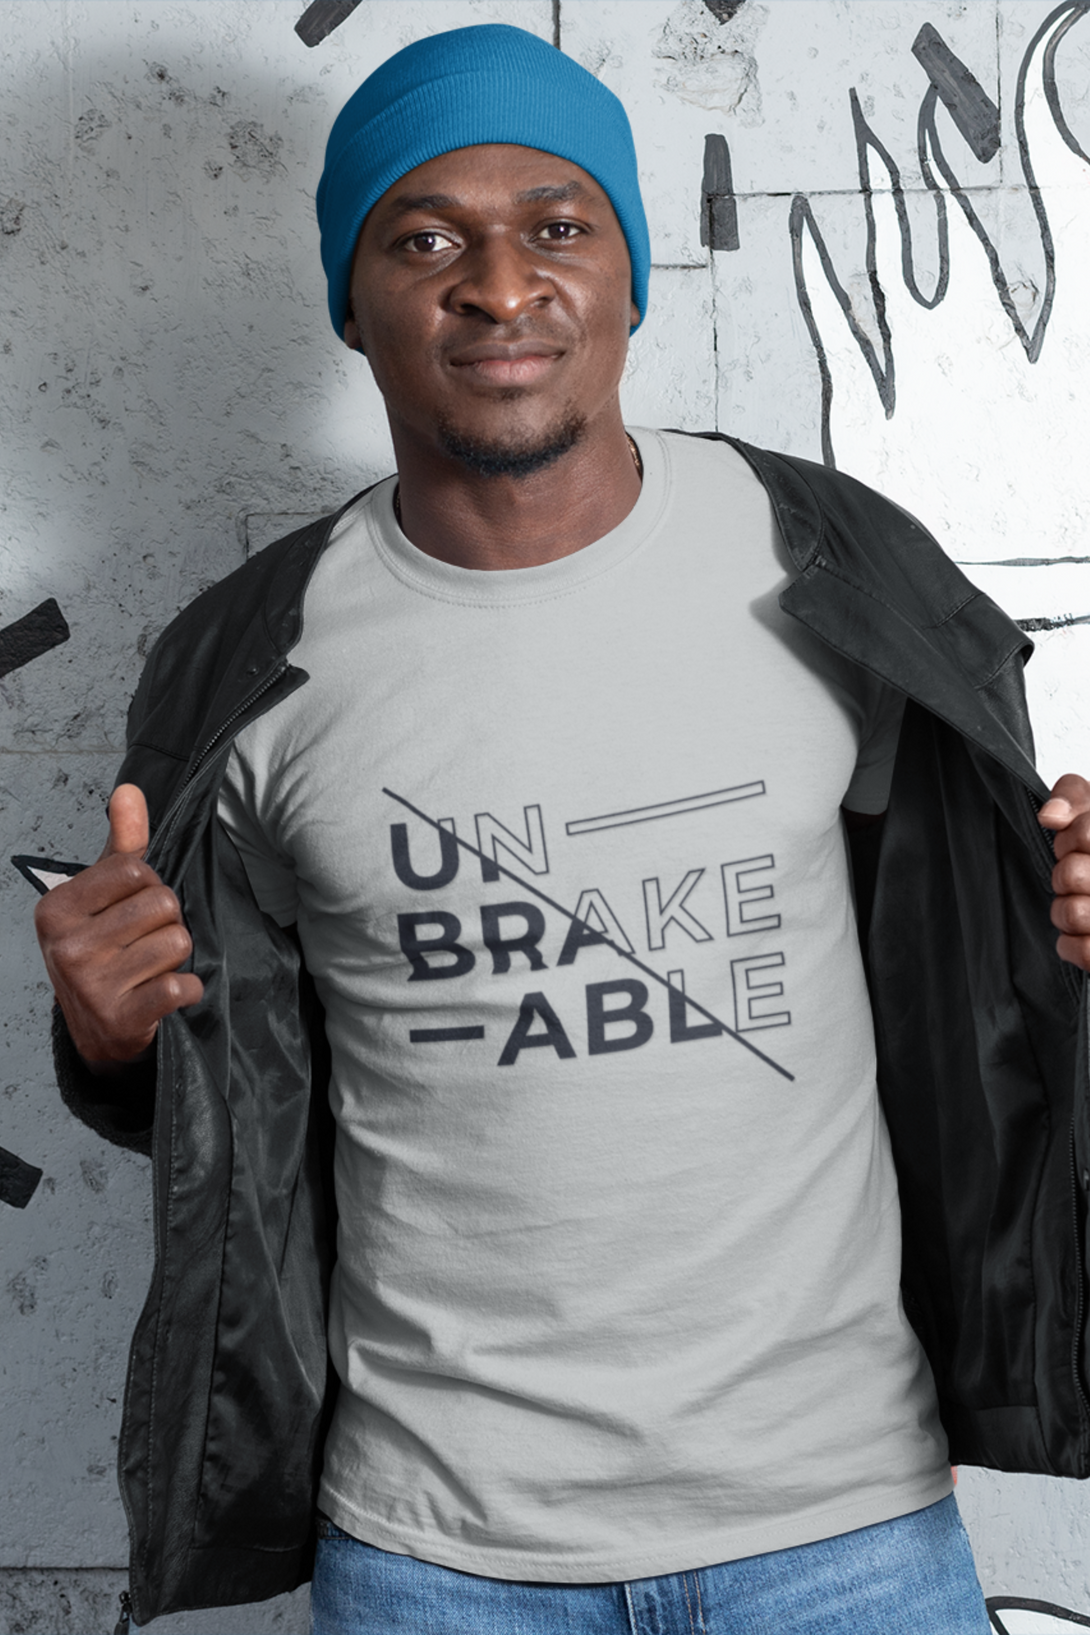 Unbreakable Printed T-Shirt For Men - WowWaves - 2